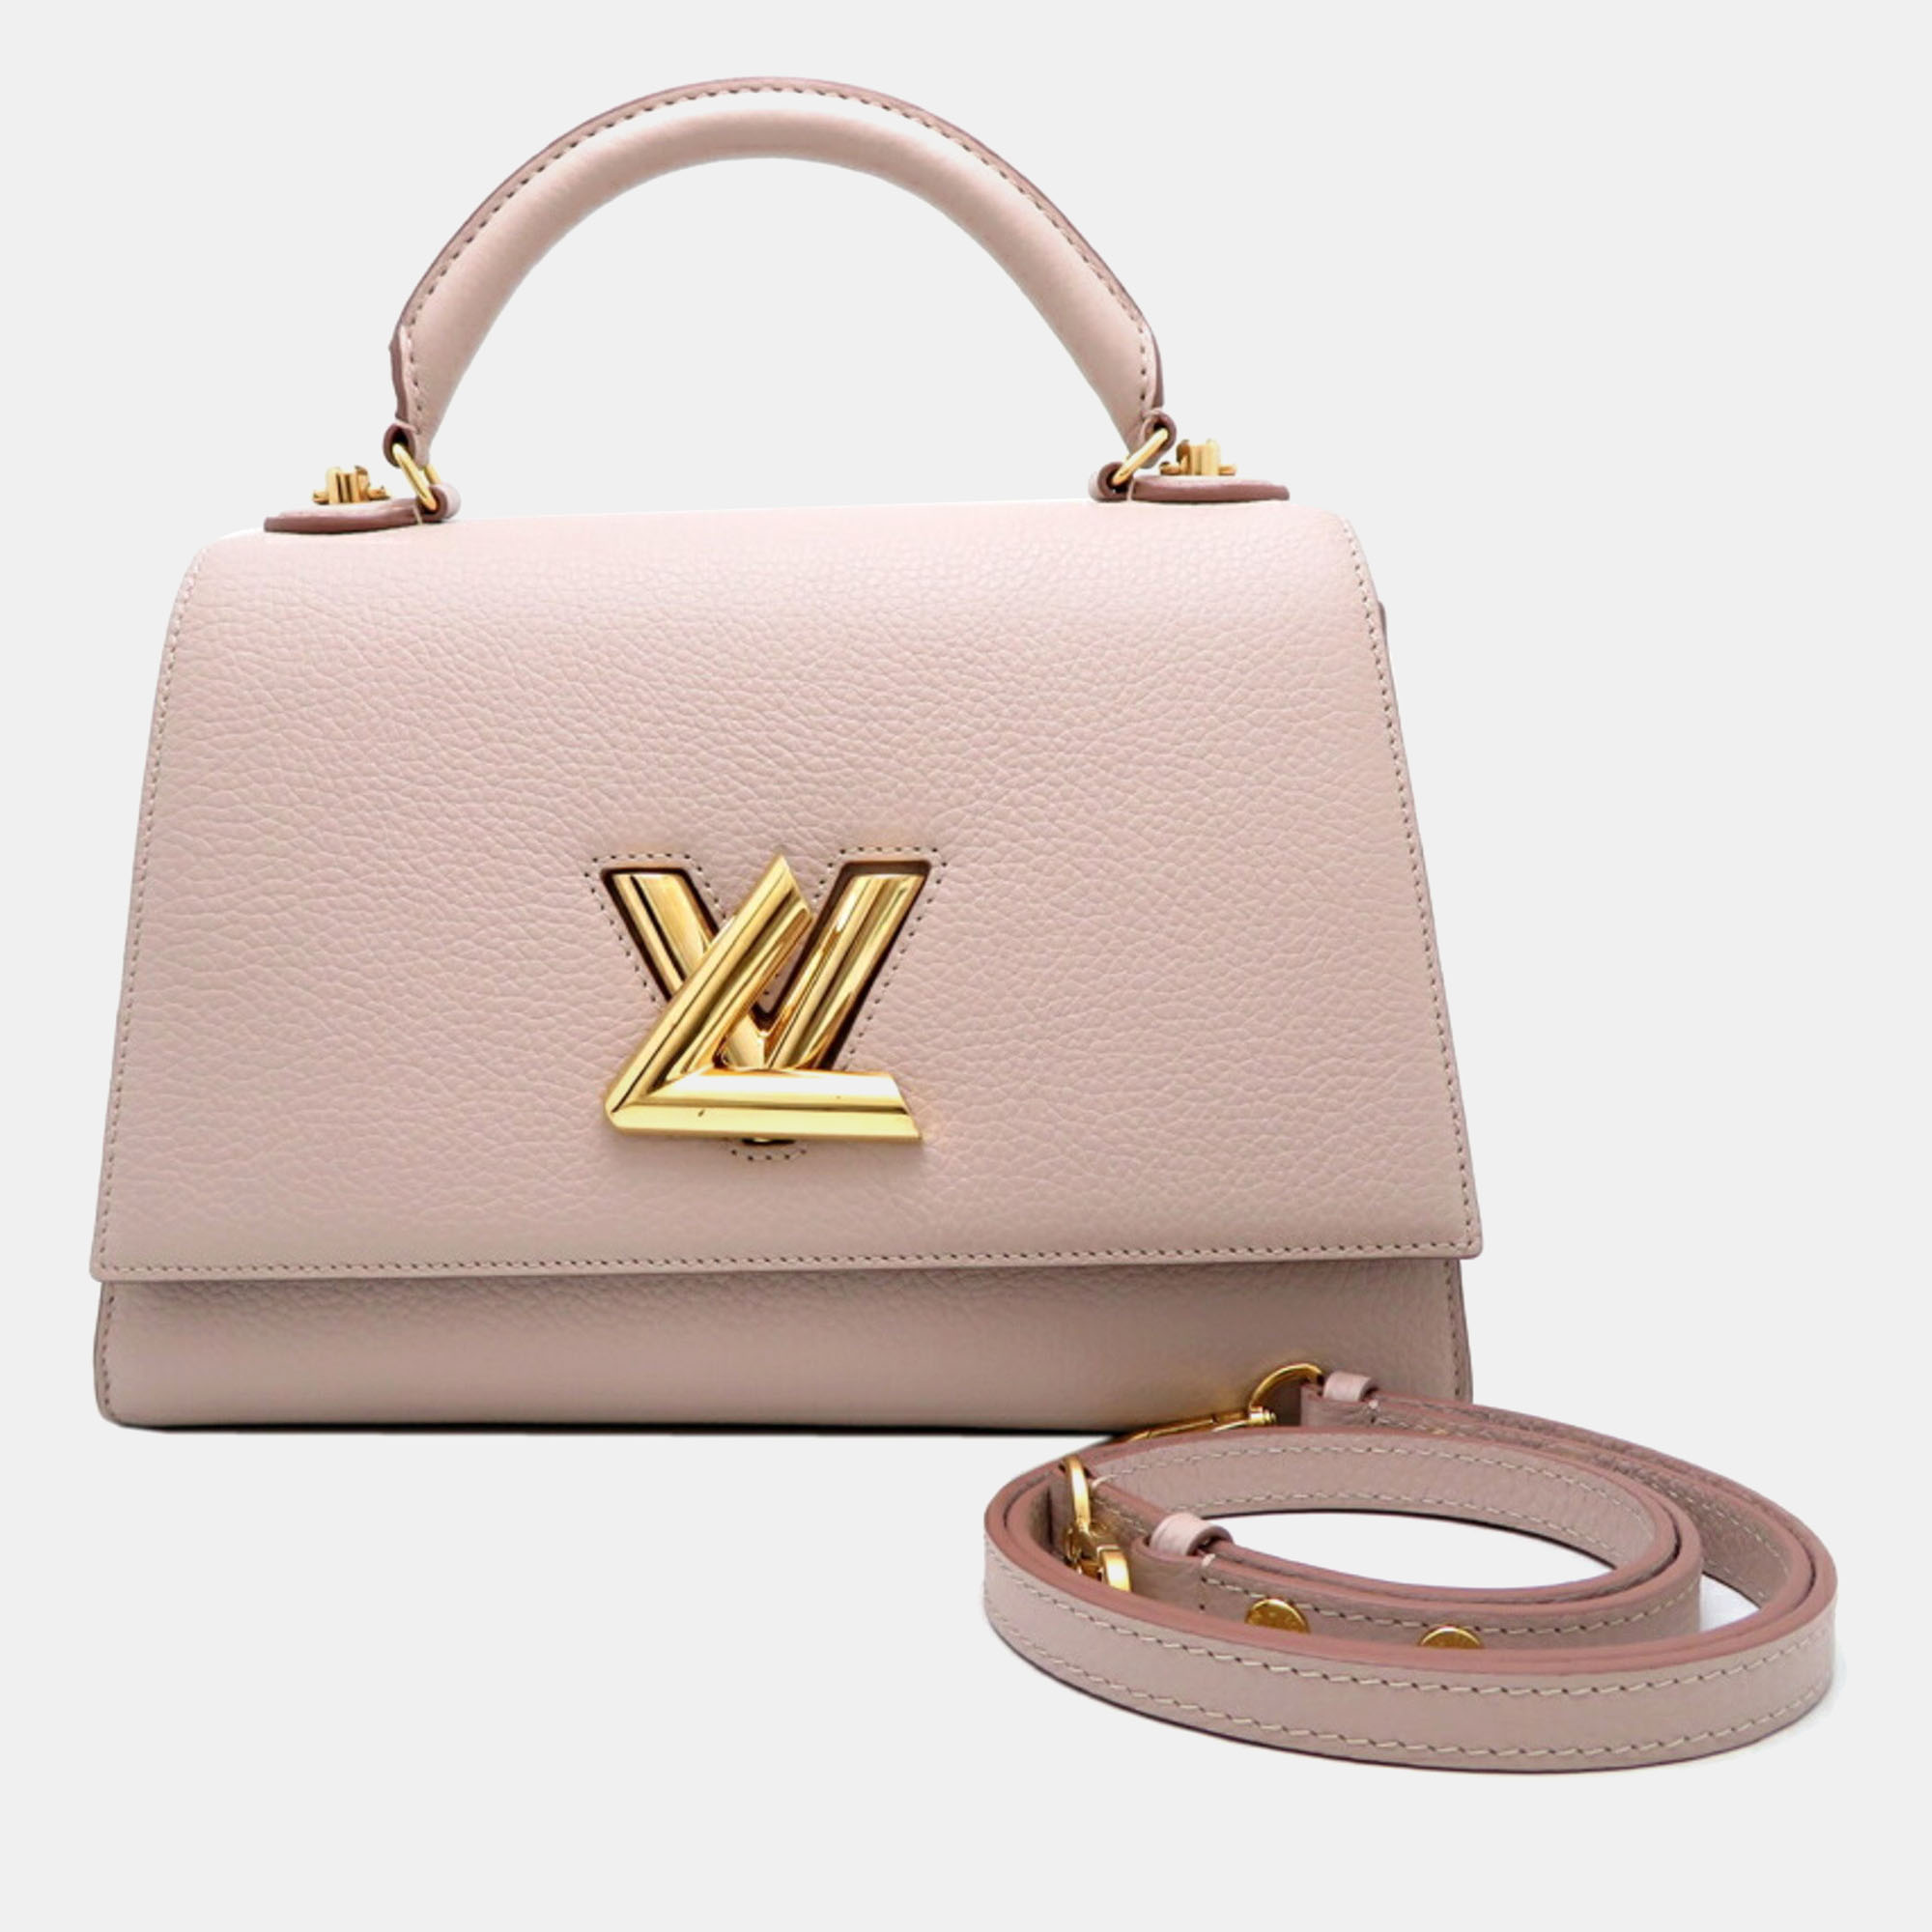 Louis vuitton pink leather mm twist one handle mm bag